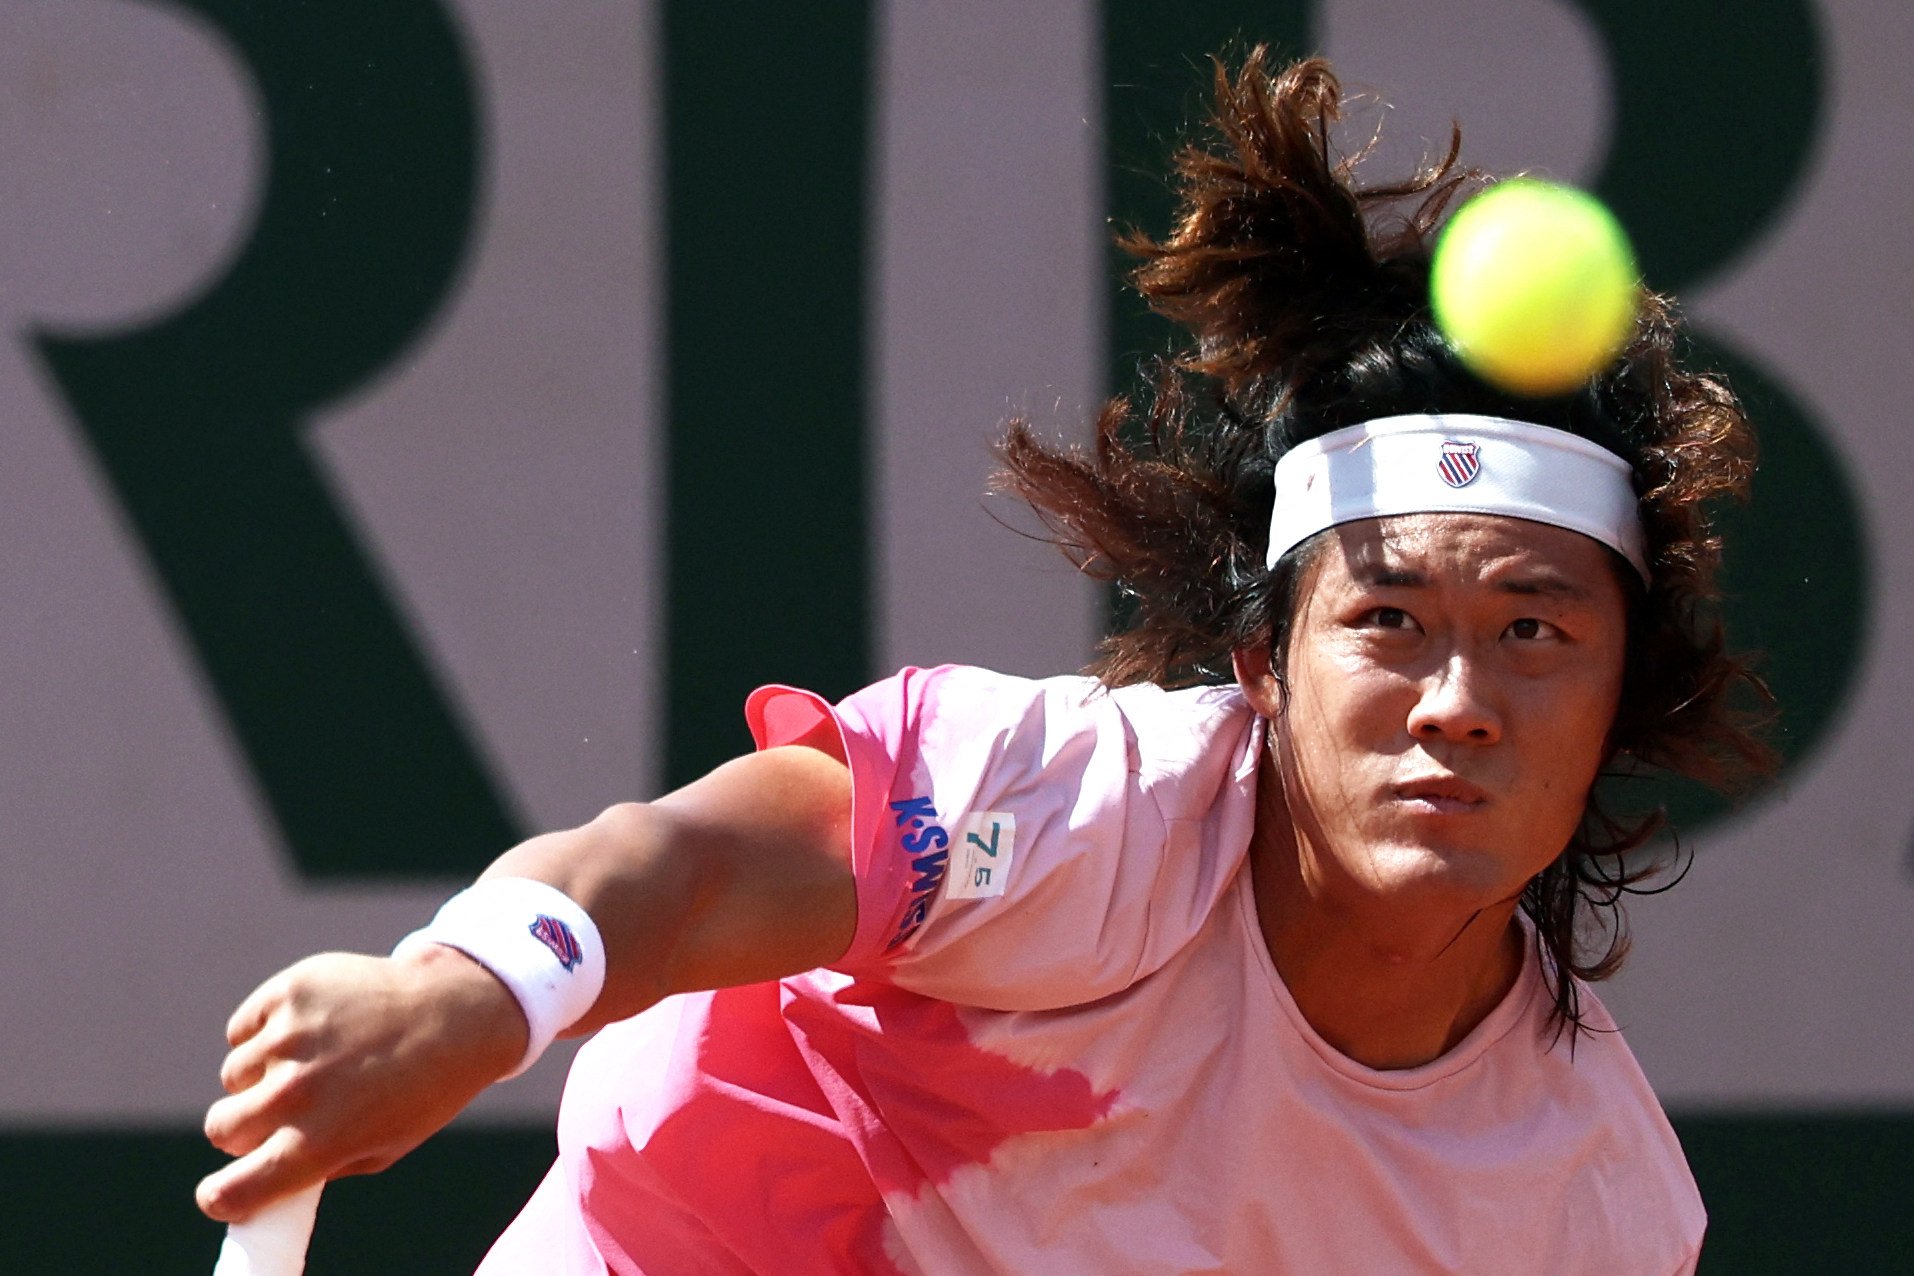 China’s Zhang Zhizhen serves to Australia’s Aleksandar Vukic during their men’s singles match on day one of the French Open. Photo: AFP